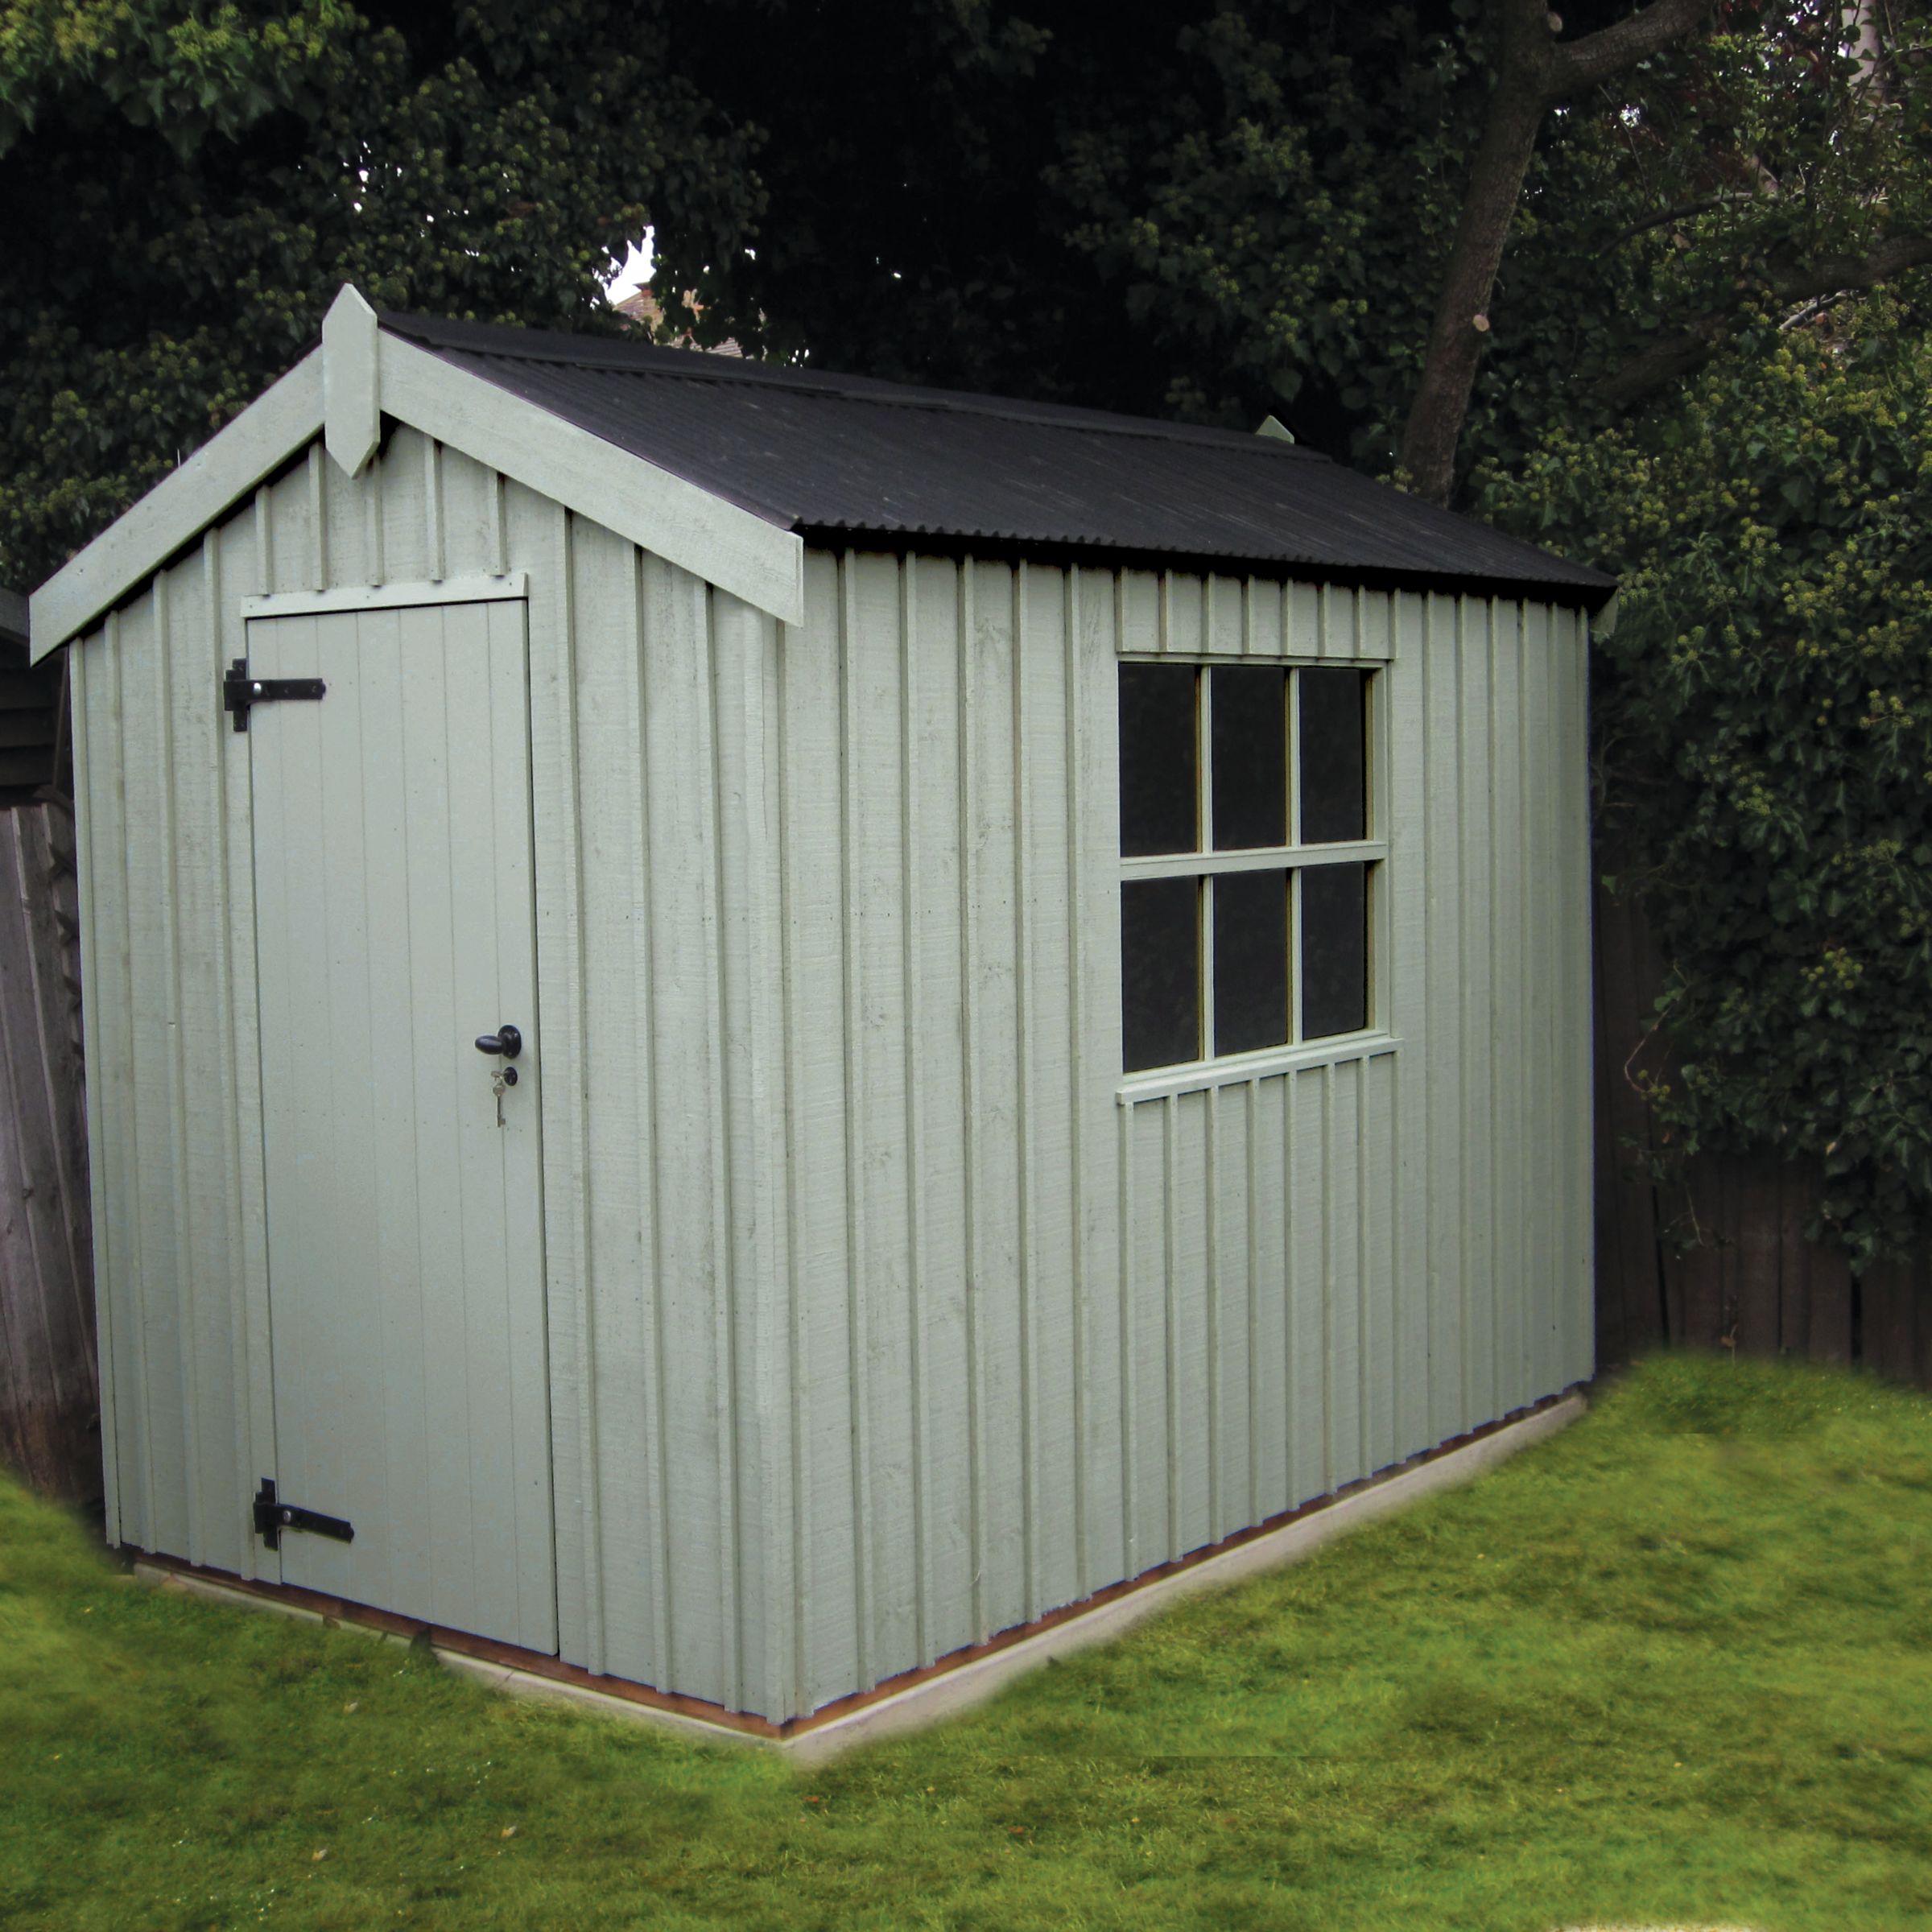 Buy National Trust by Crane Peckover Garden Shed, 1.8 x 2 ...